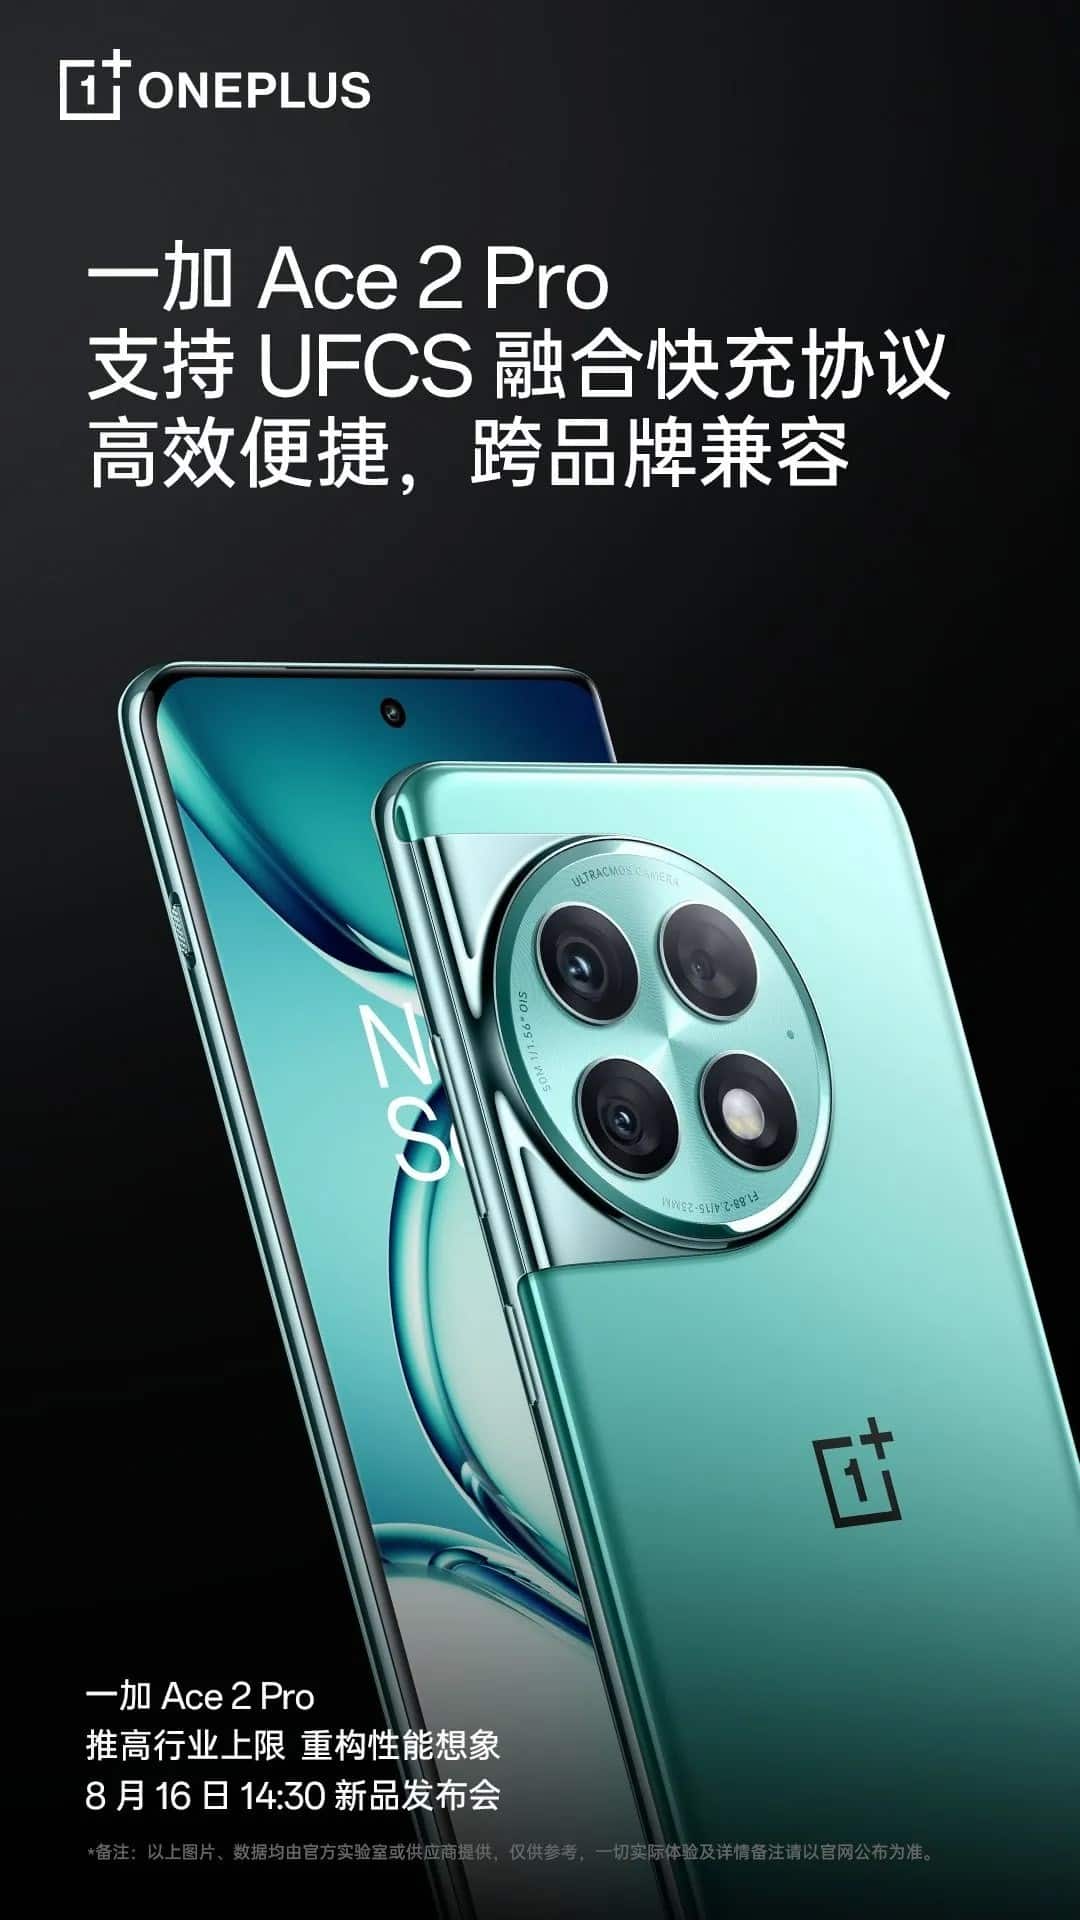 upcoming Ace 2 Pro smartphone